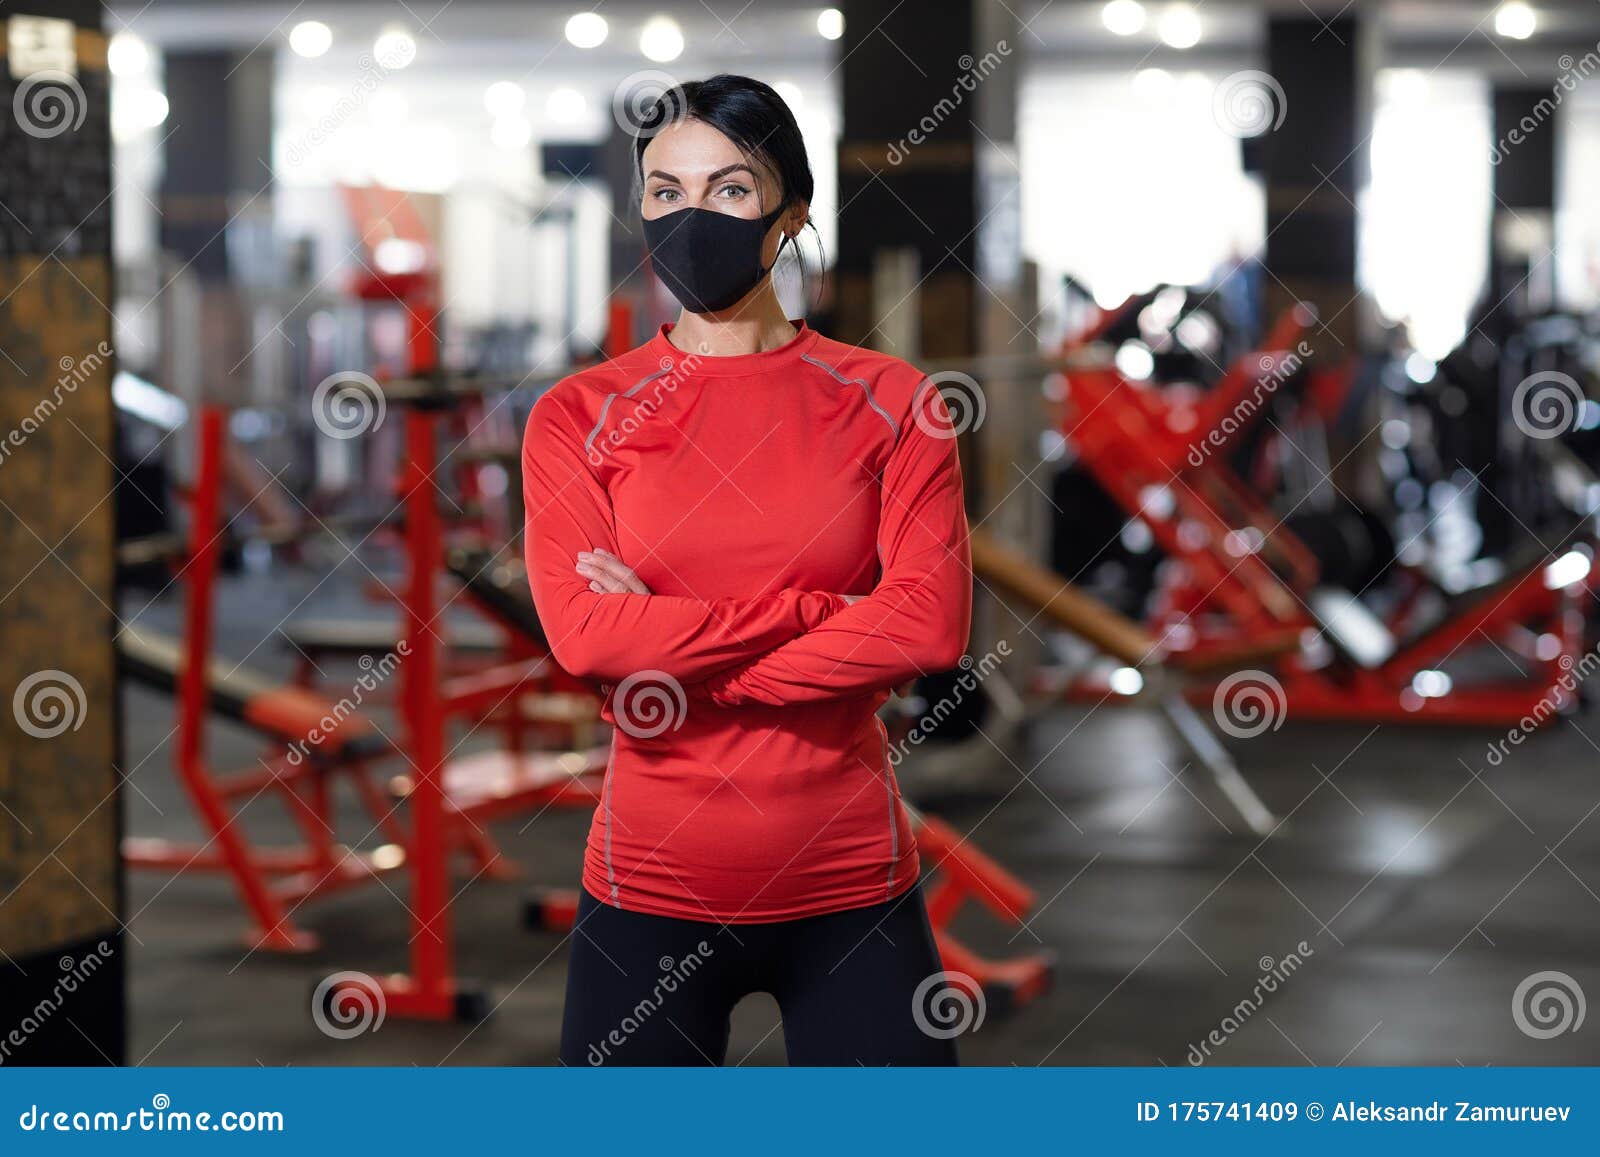 coronavirus covid-19 prevention, fitness girl with a medical mask posing in gym. fighting viruses